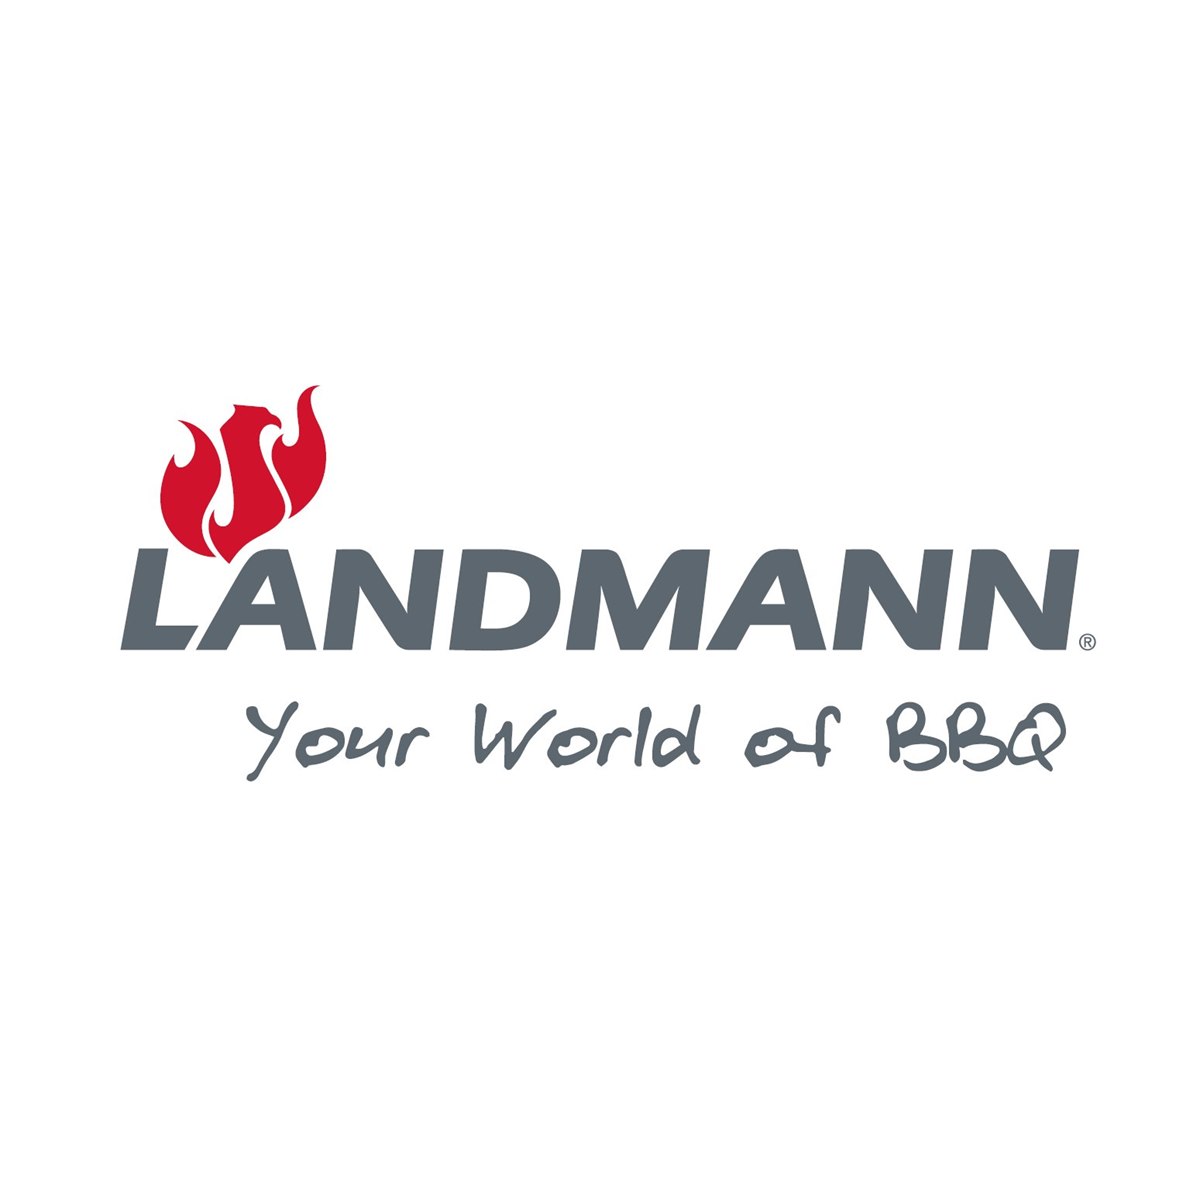 Where to Buy Landmann Barbecue Products